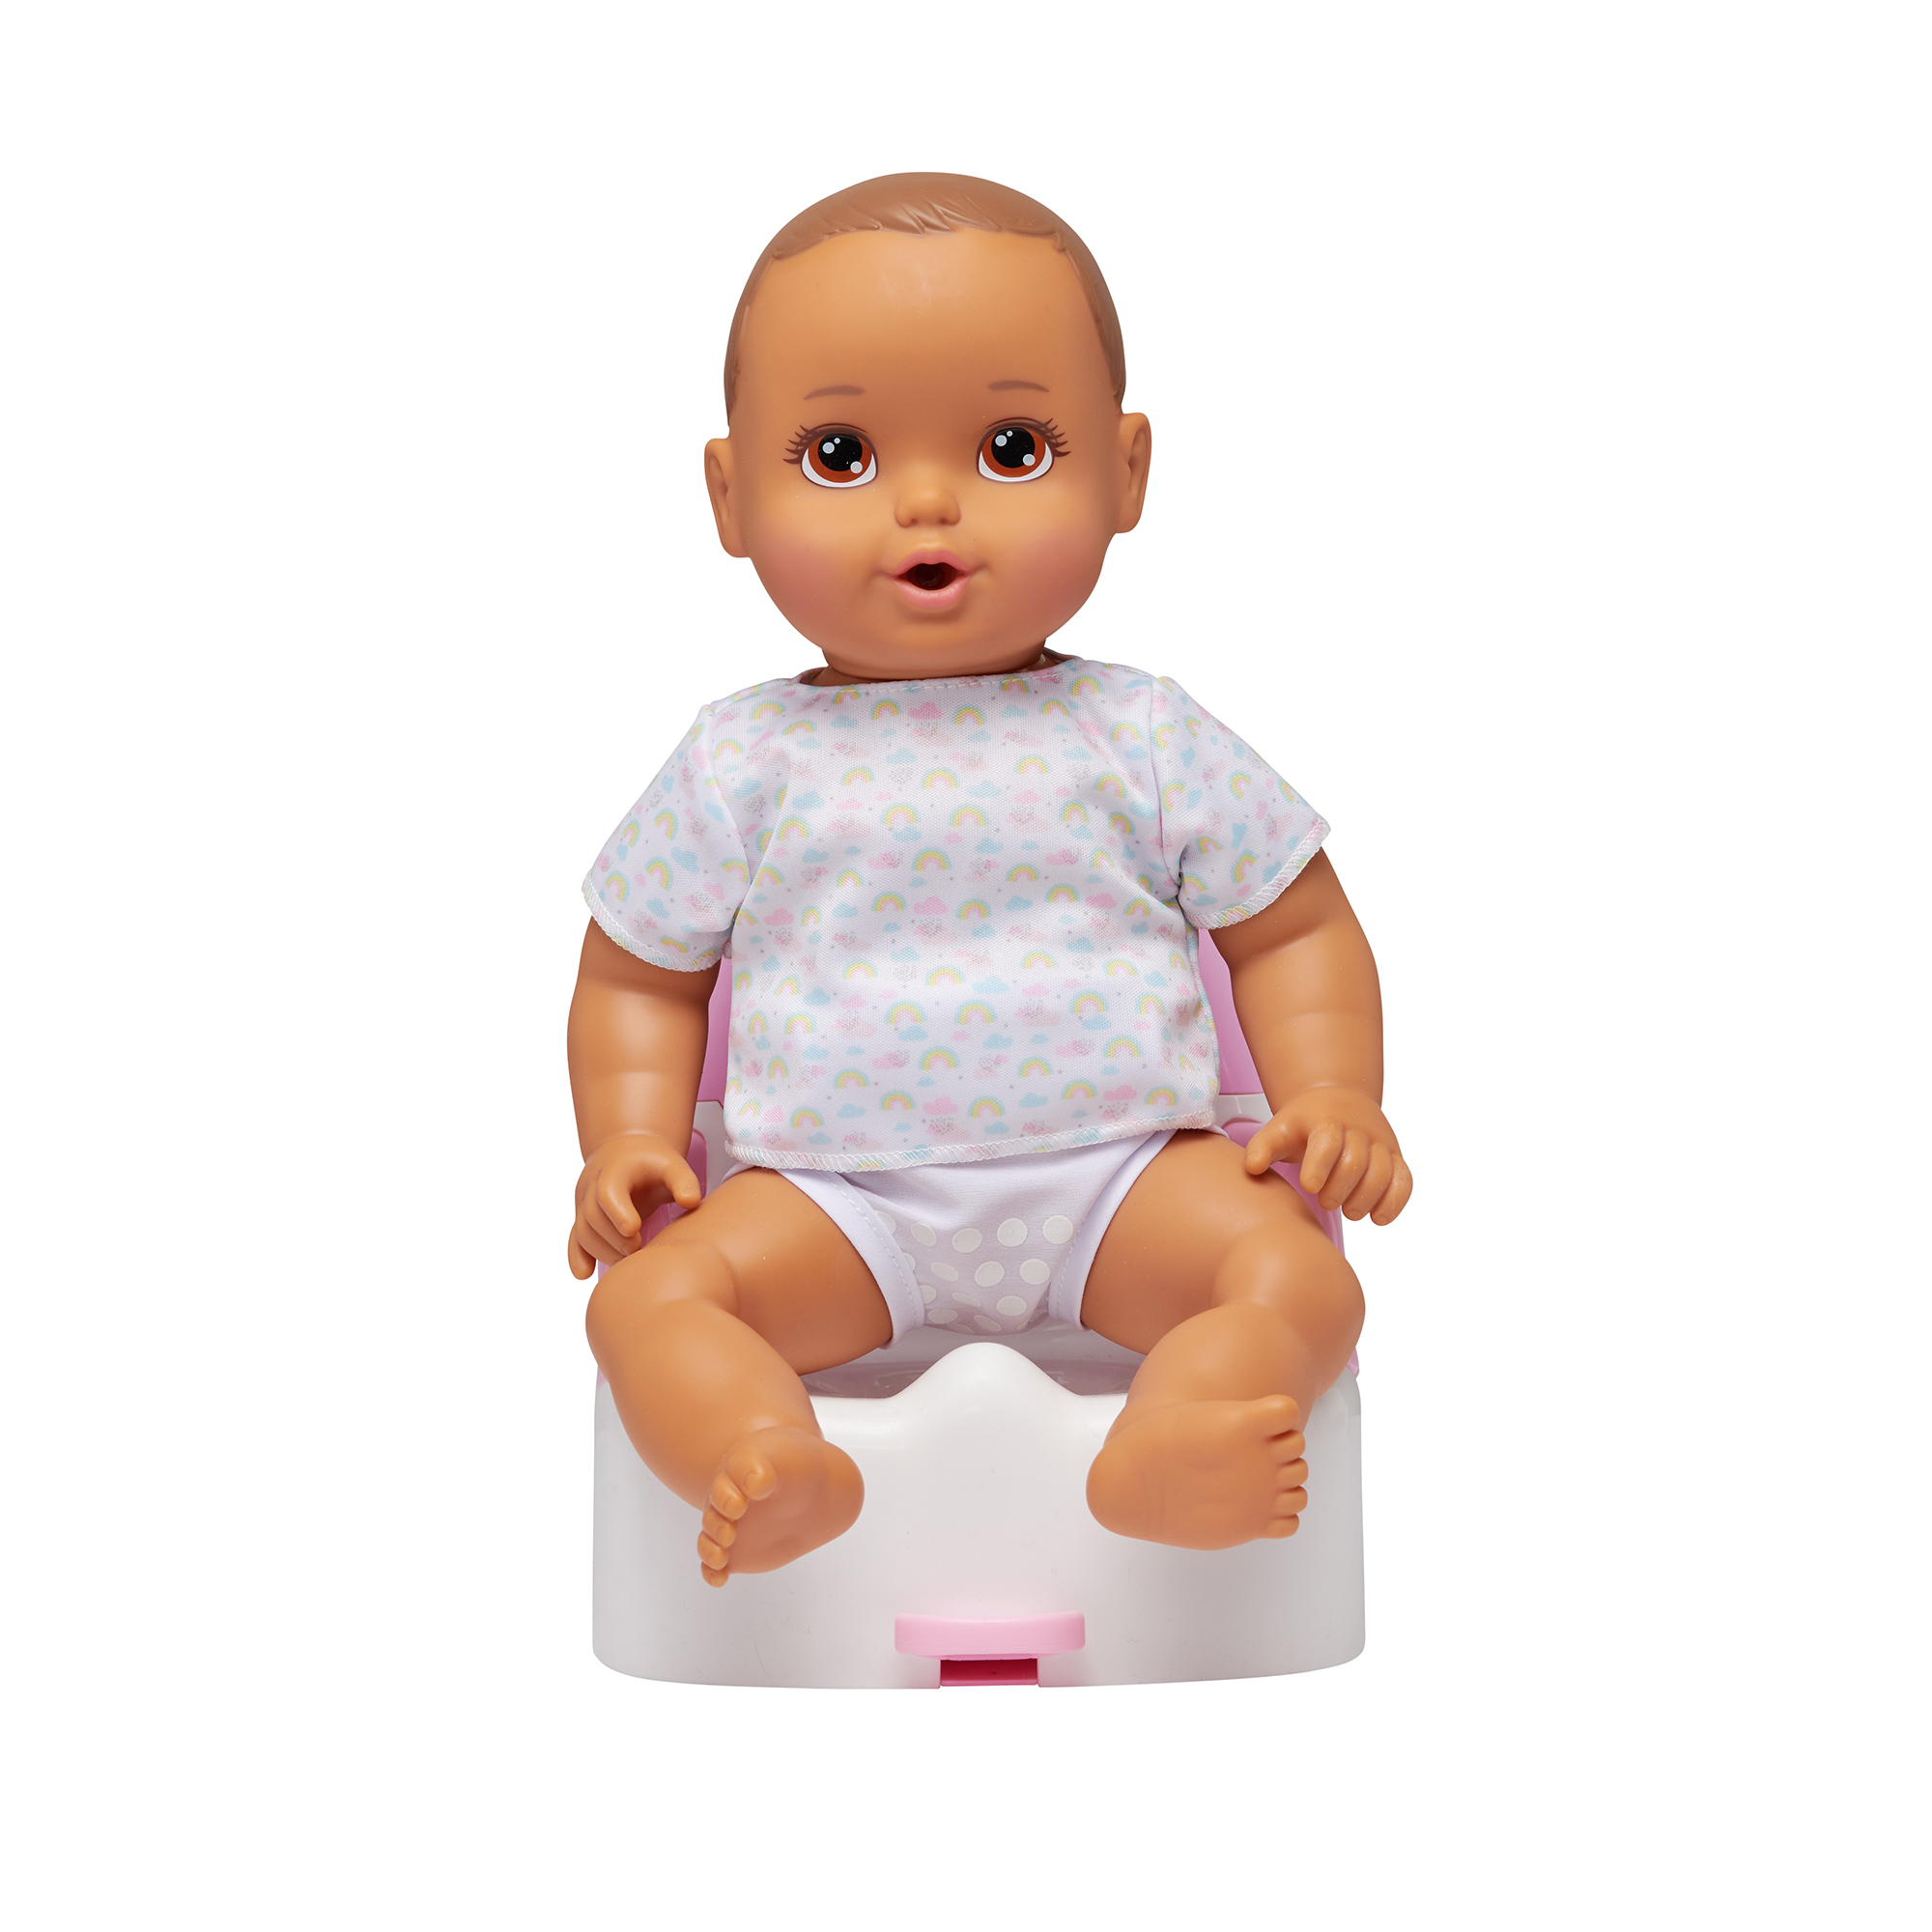 14" Feed & Wet w/ 14'-inch' Brunette Hair/Brown Eyes Baby Doll 3-pieces Makes Flushing Potty Sounds